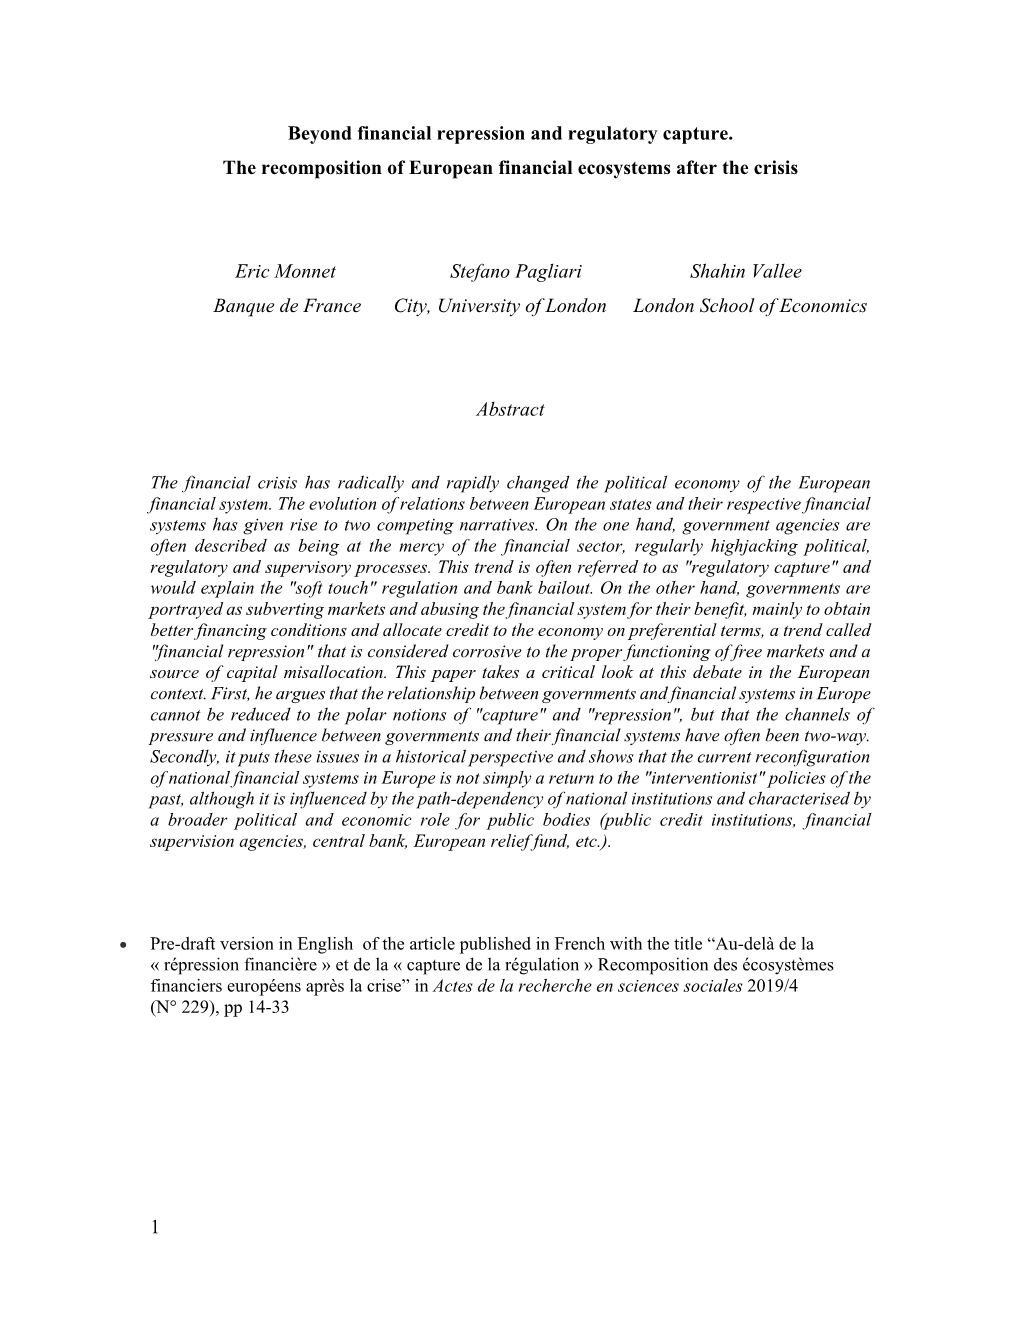 1 Beyond Financial Repression and Regulatory Capture. the Recomposition of European Financial Ecosystems After the Crisis Eric M